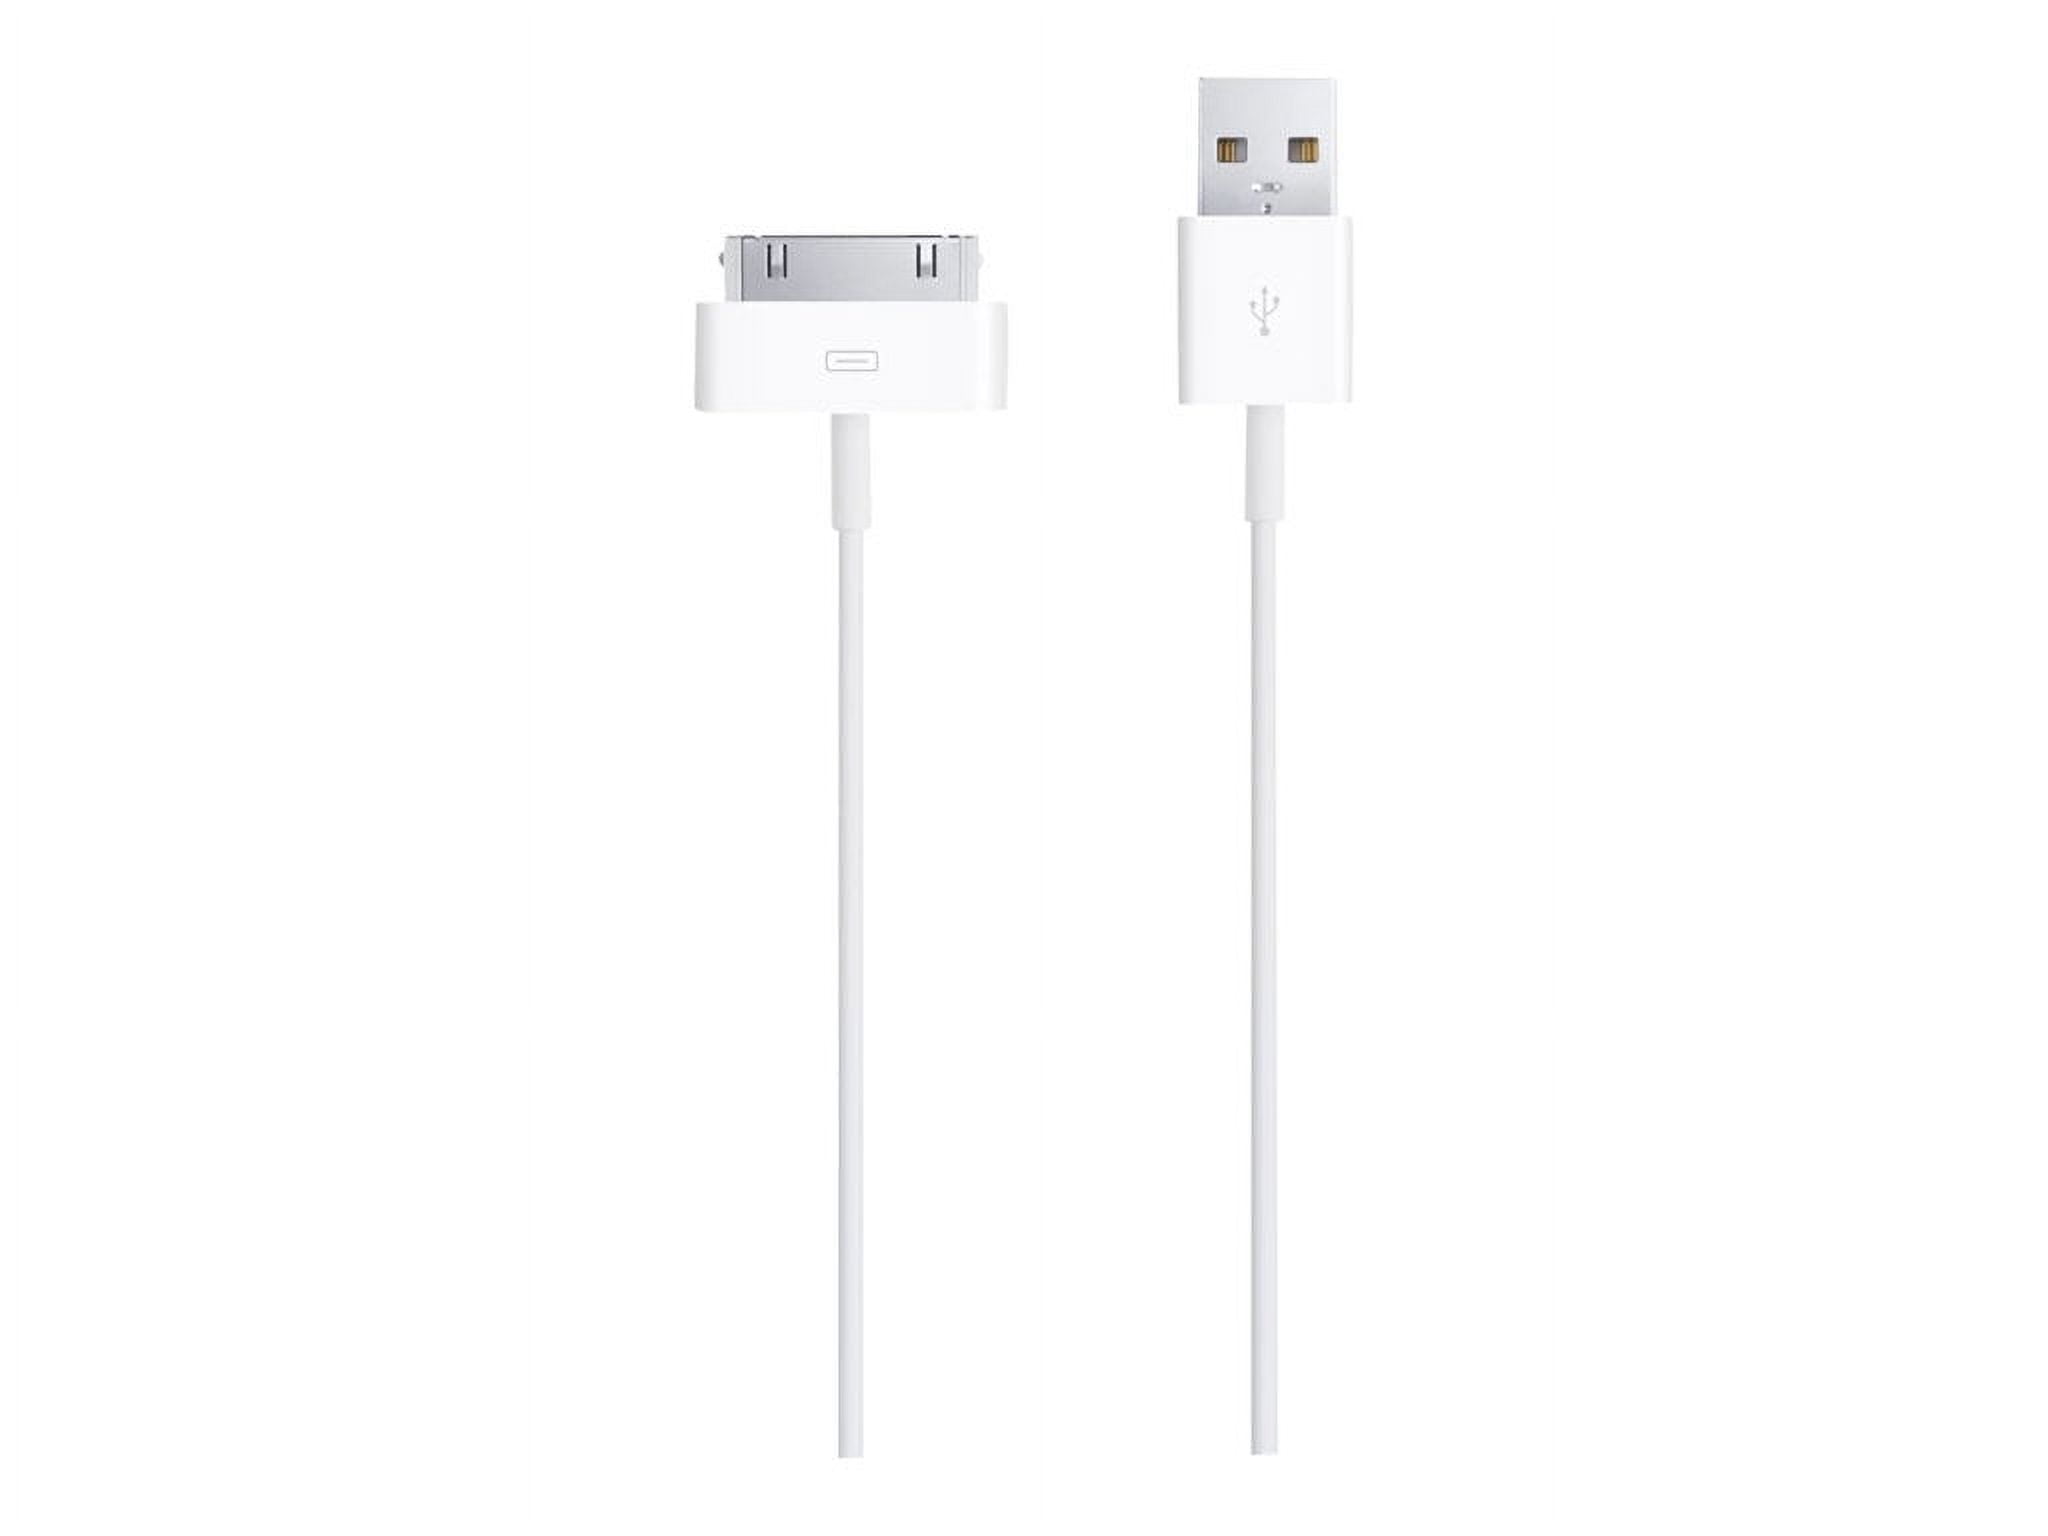 Apple Certified 30 Pin USB Charging Cable, 4.0ft USB Sync Charging Cord  iPhone Compatible for 4 4s 3G 3GS iPad 1 2 3 iPod Touch Nano White (1 PCS)